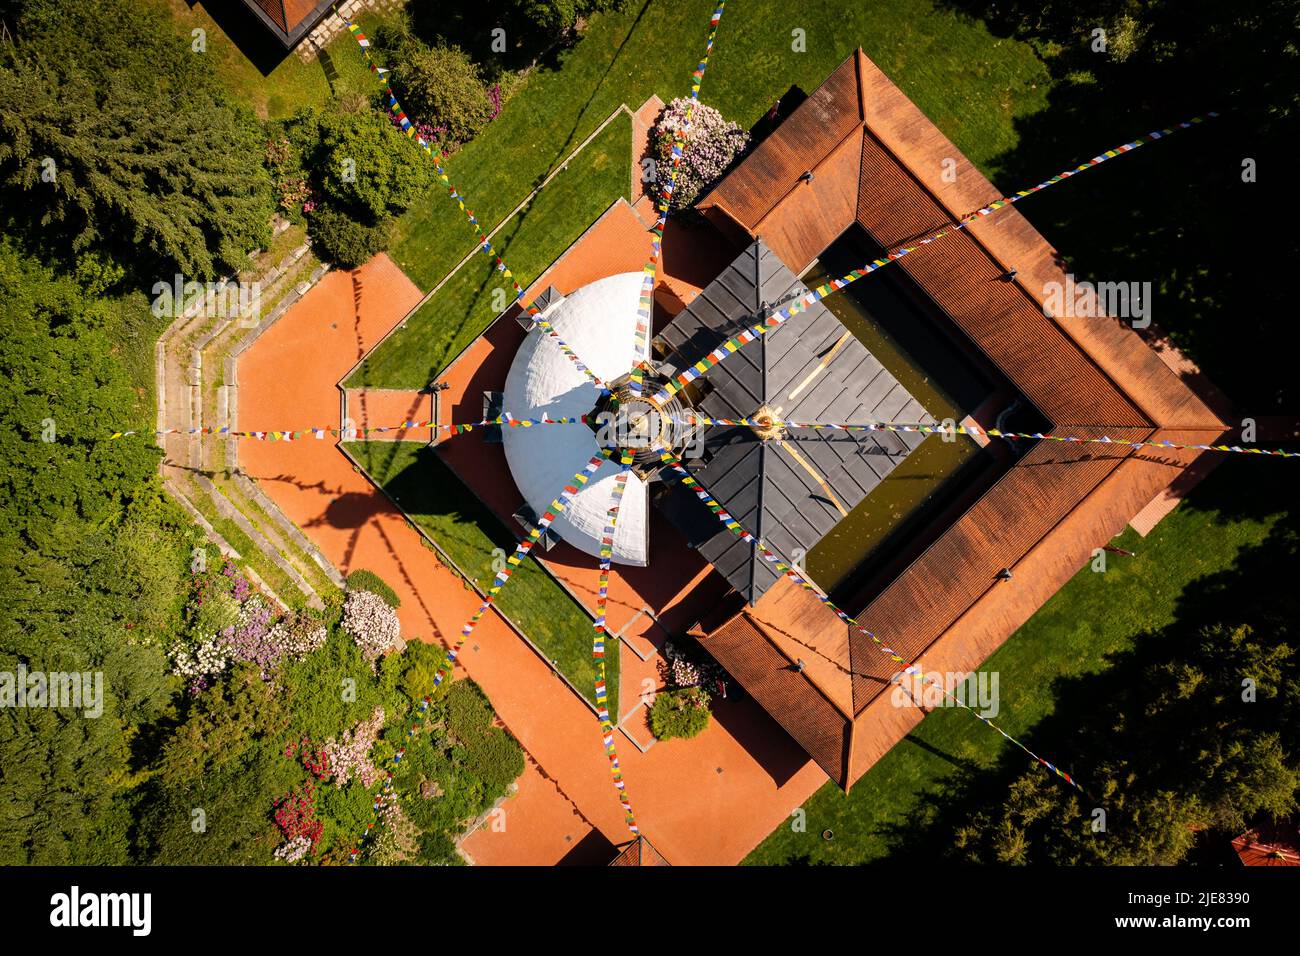 Aerial photo about Nepal Tibet pavilion in Germany. Spiritual temple tower with hanging flags. Time for meditation and thoughts in the Nepal Himalaya. Stock Photo